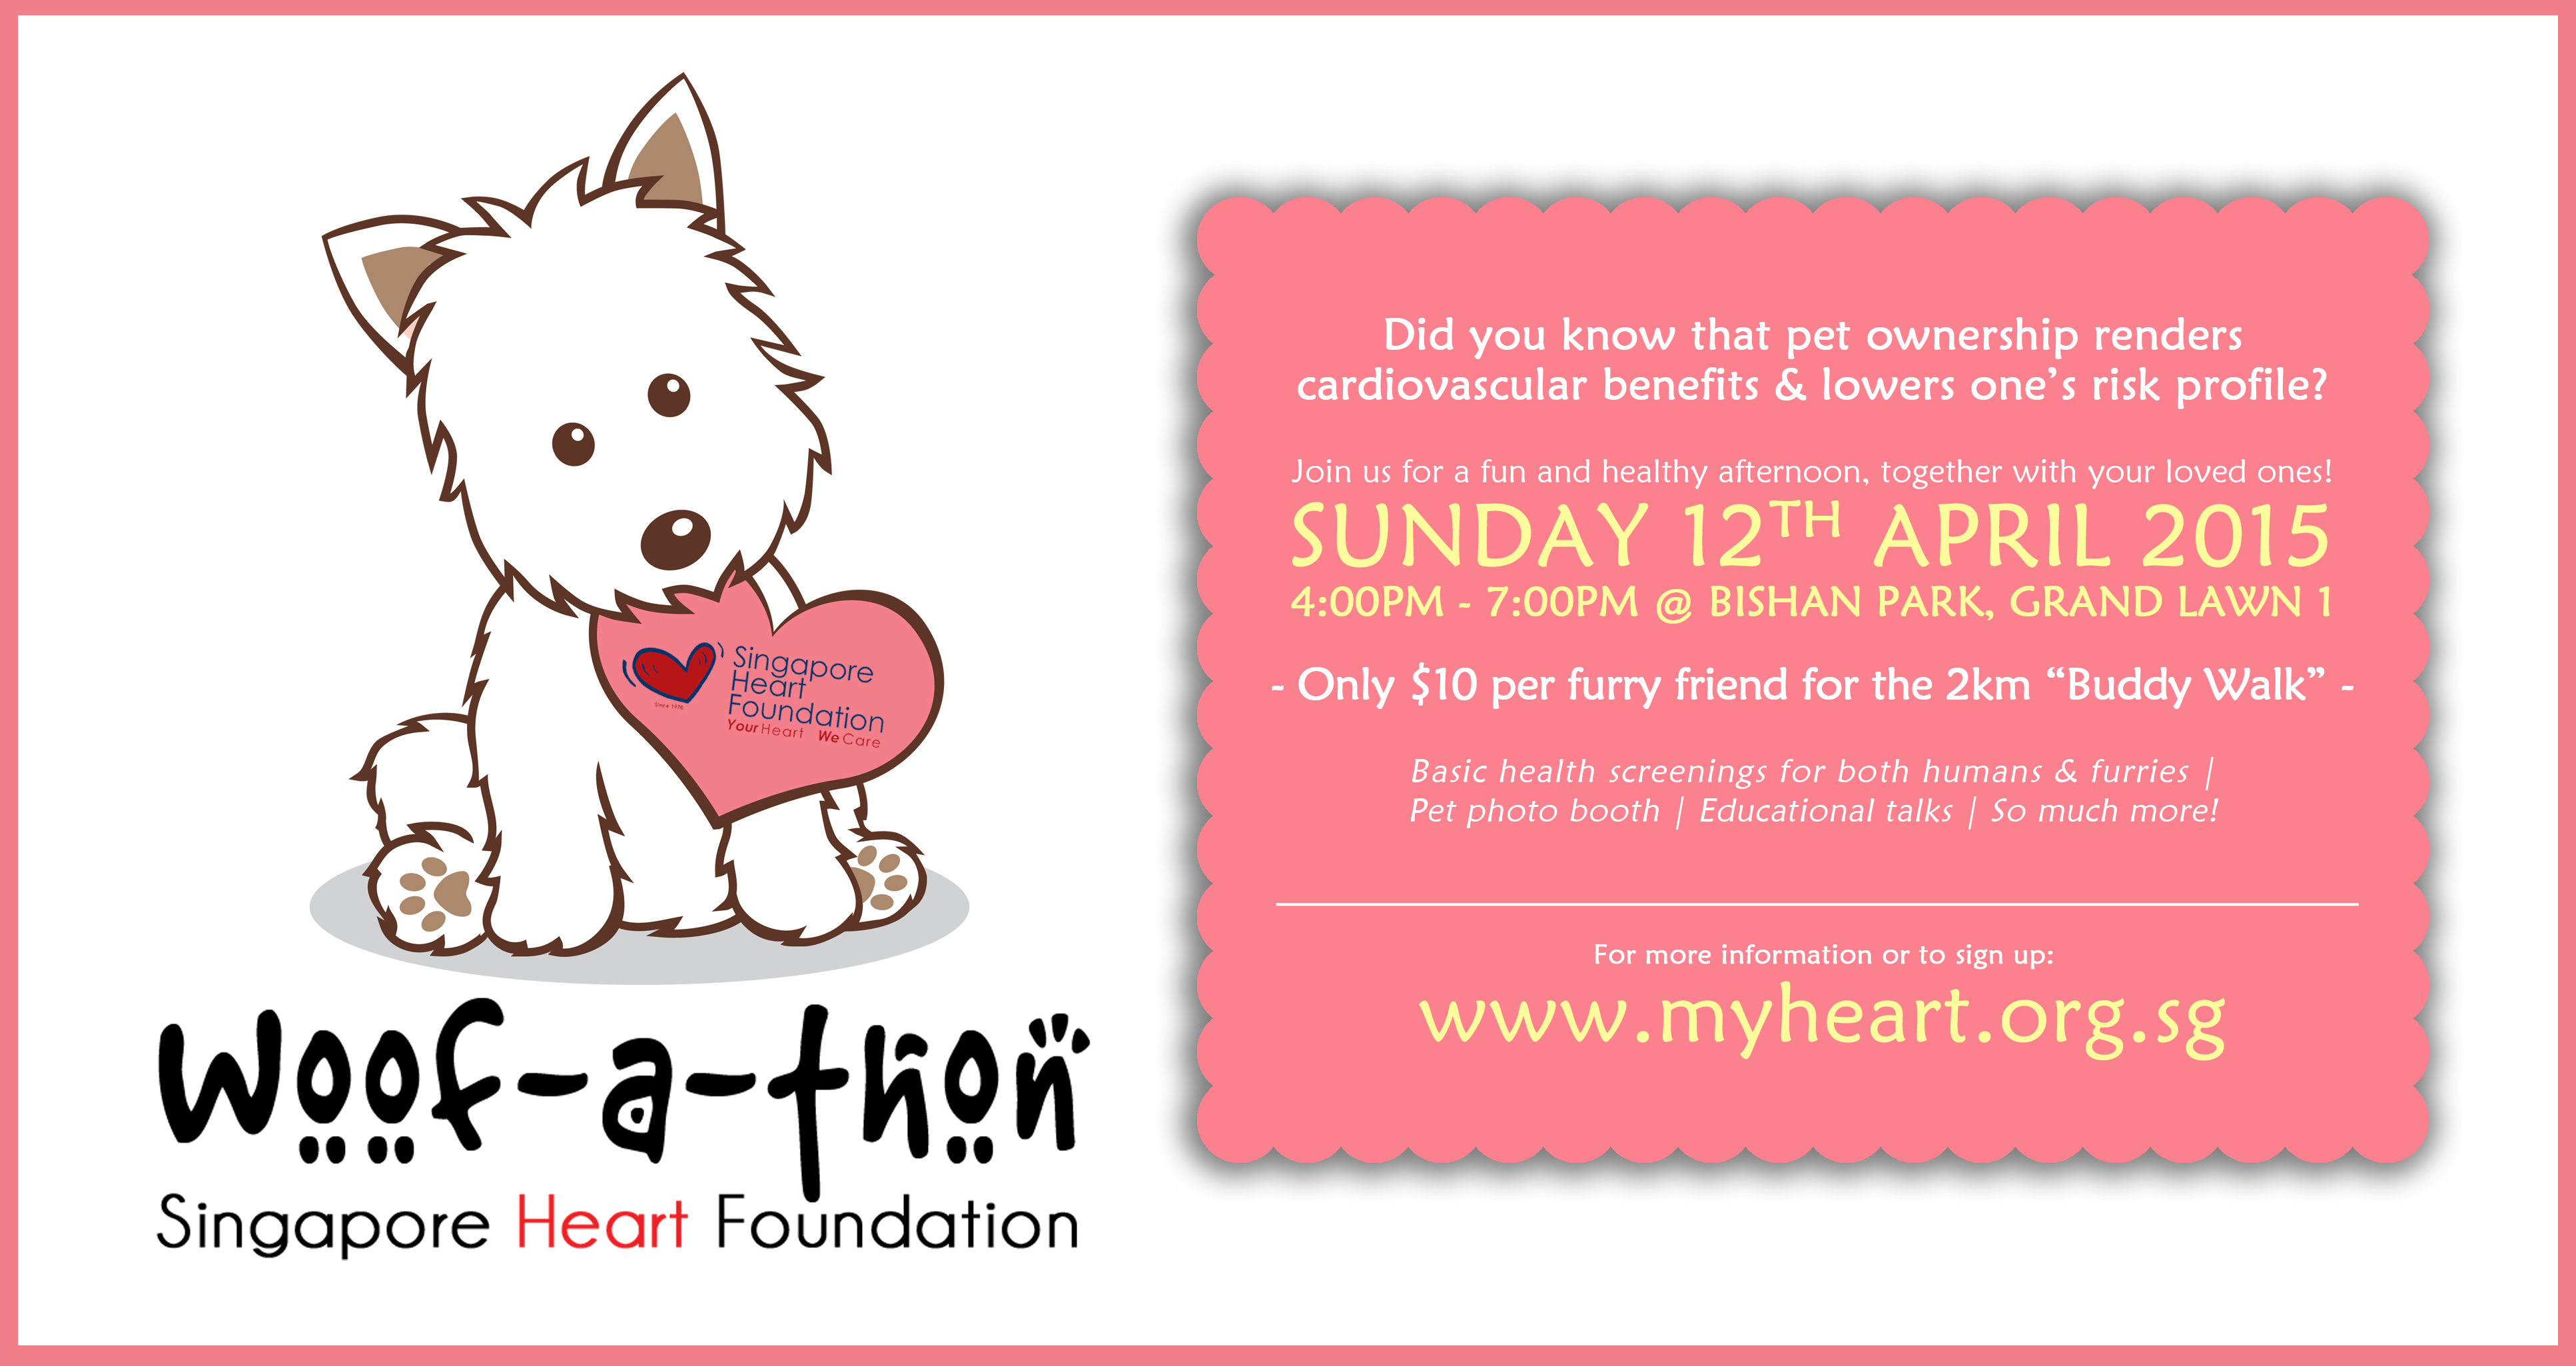 Singapore Heart Foundation Invites Pet Lovers To Woof-a-thon 2015